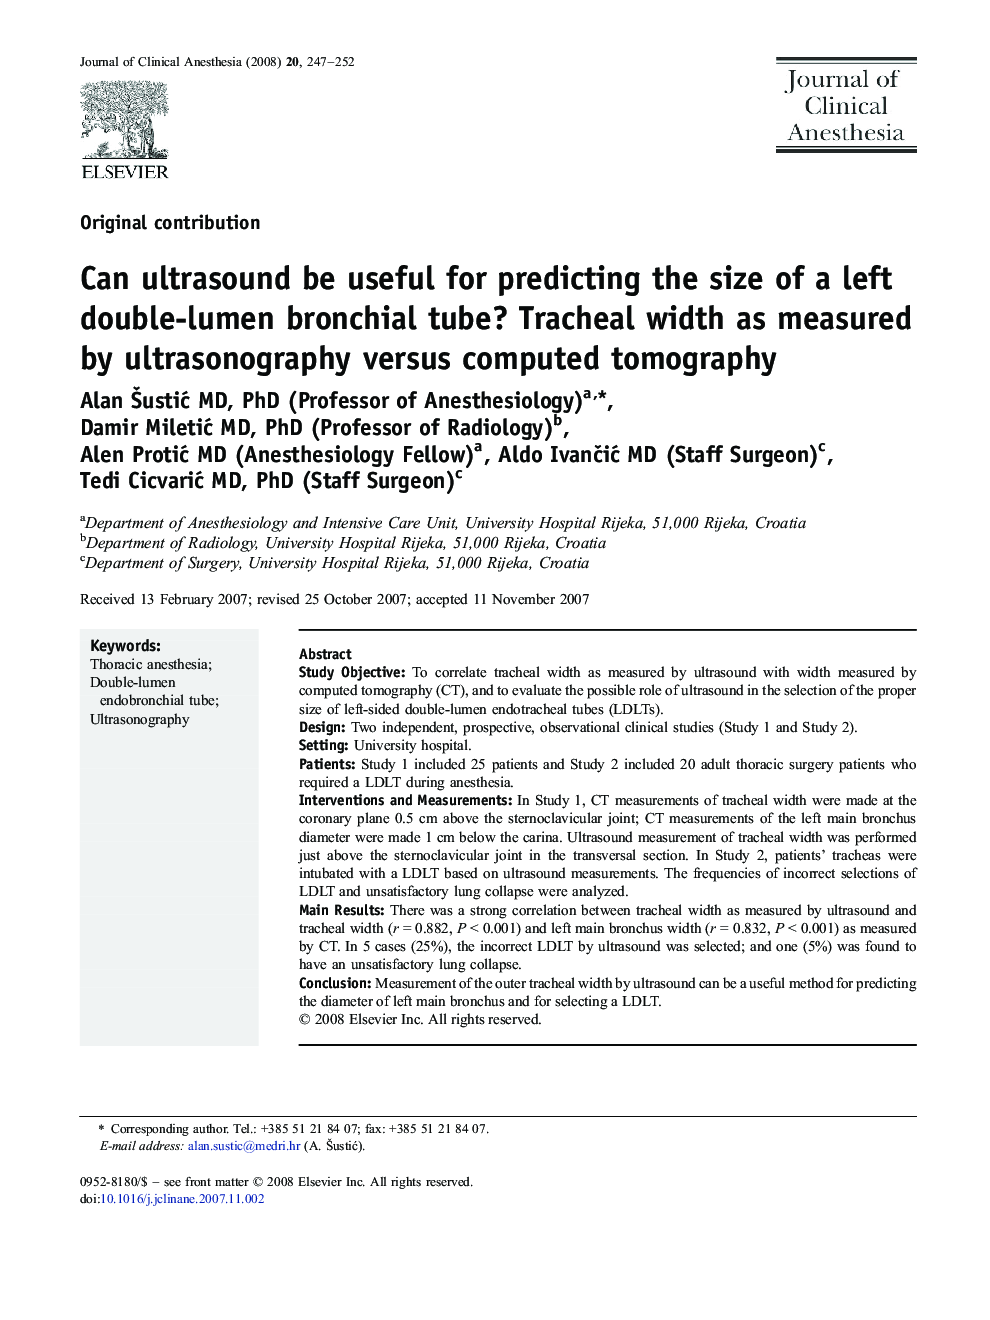 Can ultrasound be useful for predicting the size of a left double-lumen bronchial tube? Tracheal width as measured by ultrasonography versus computed tomography